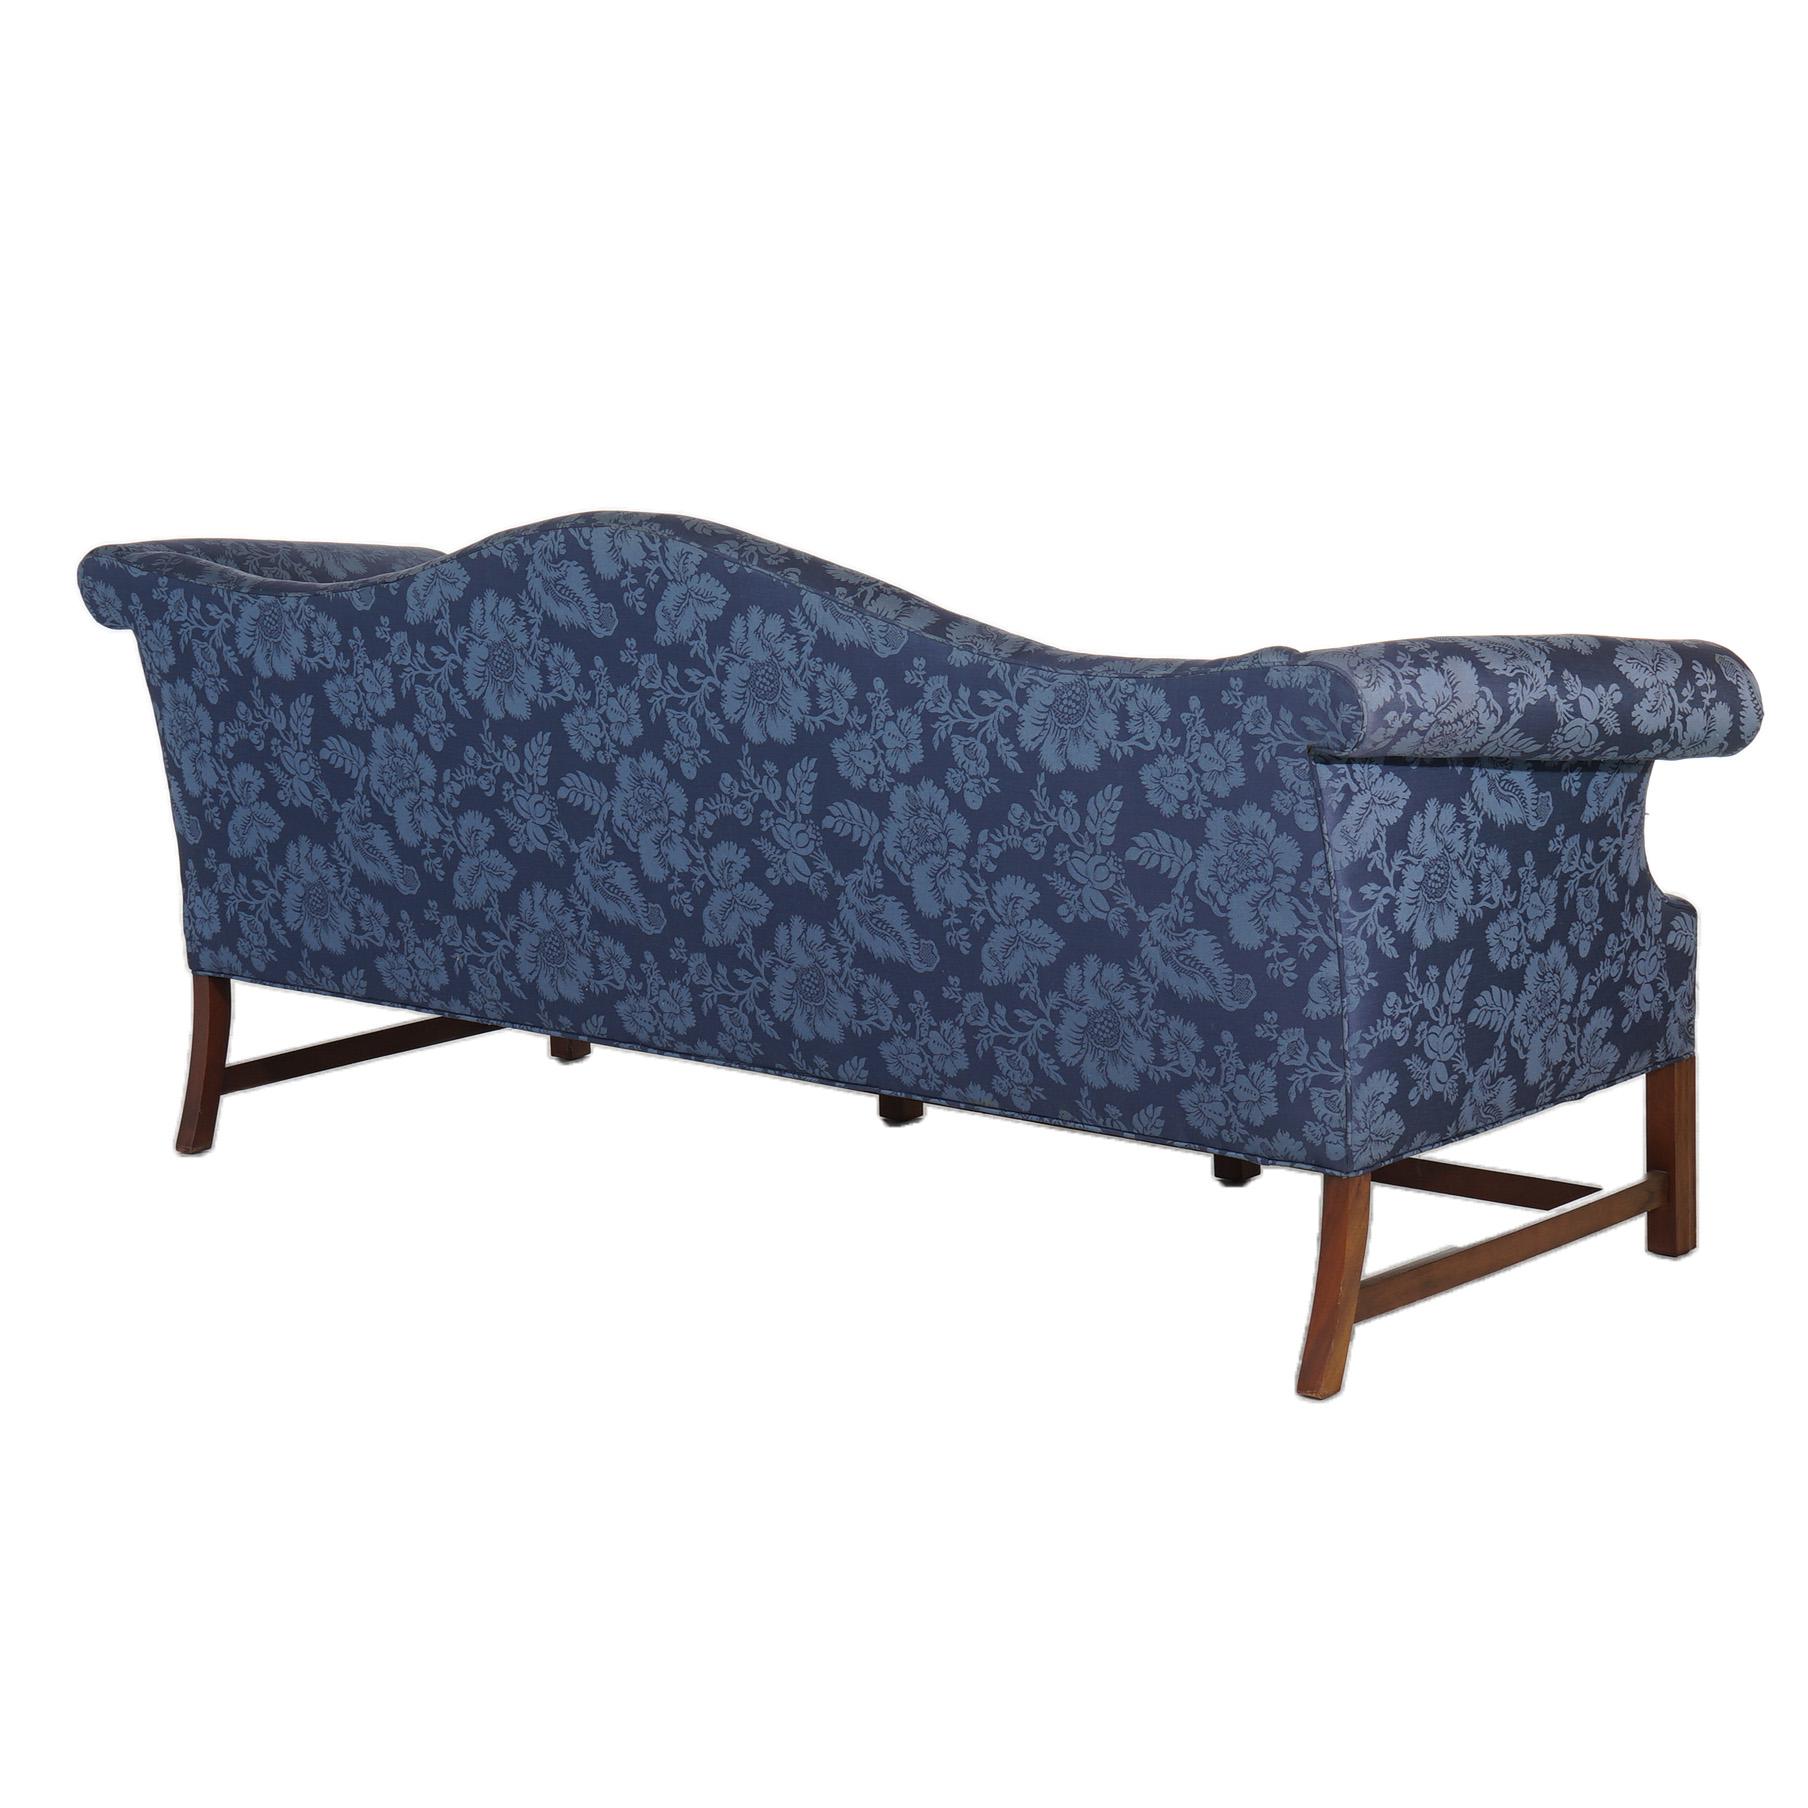 Antique Chippendale Camelback Sofa with Scroll Arms, Blue, C1930 For Sale 3